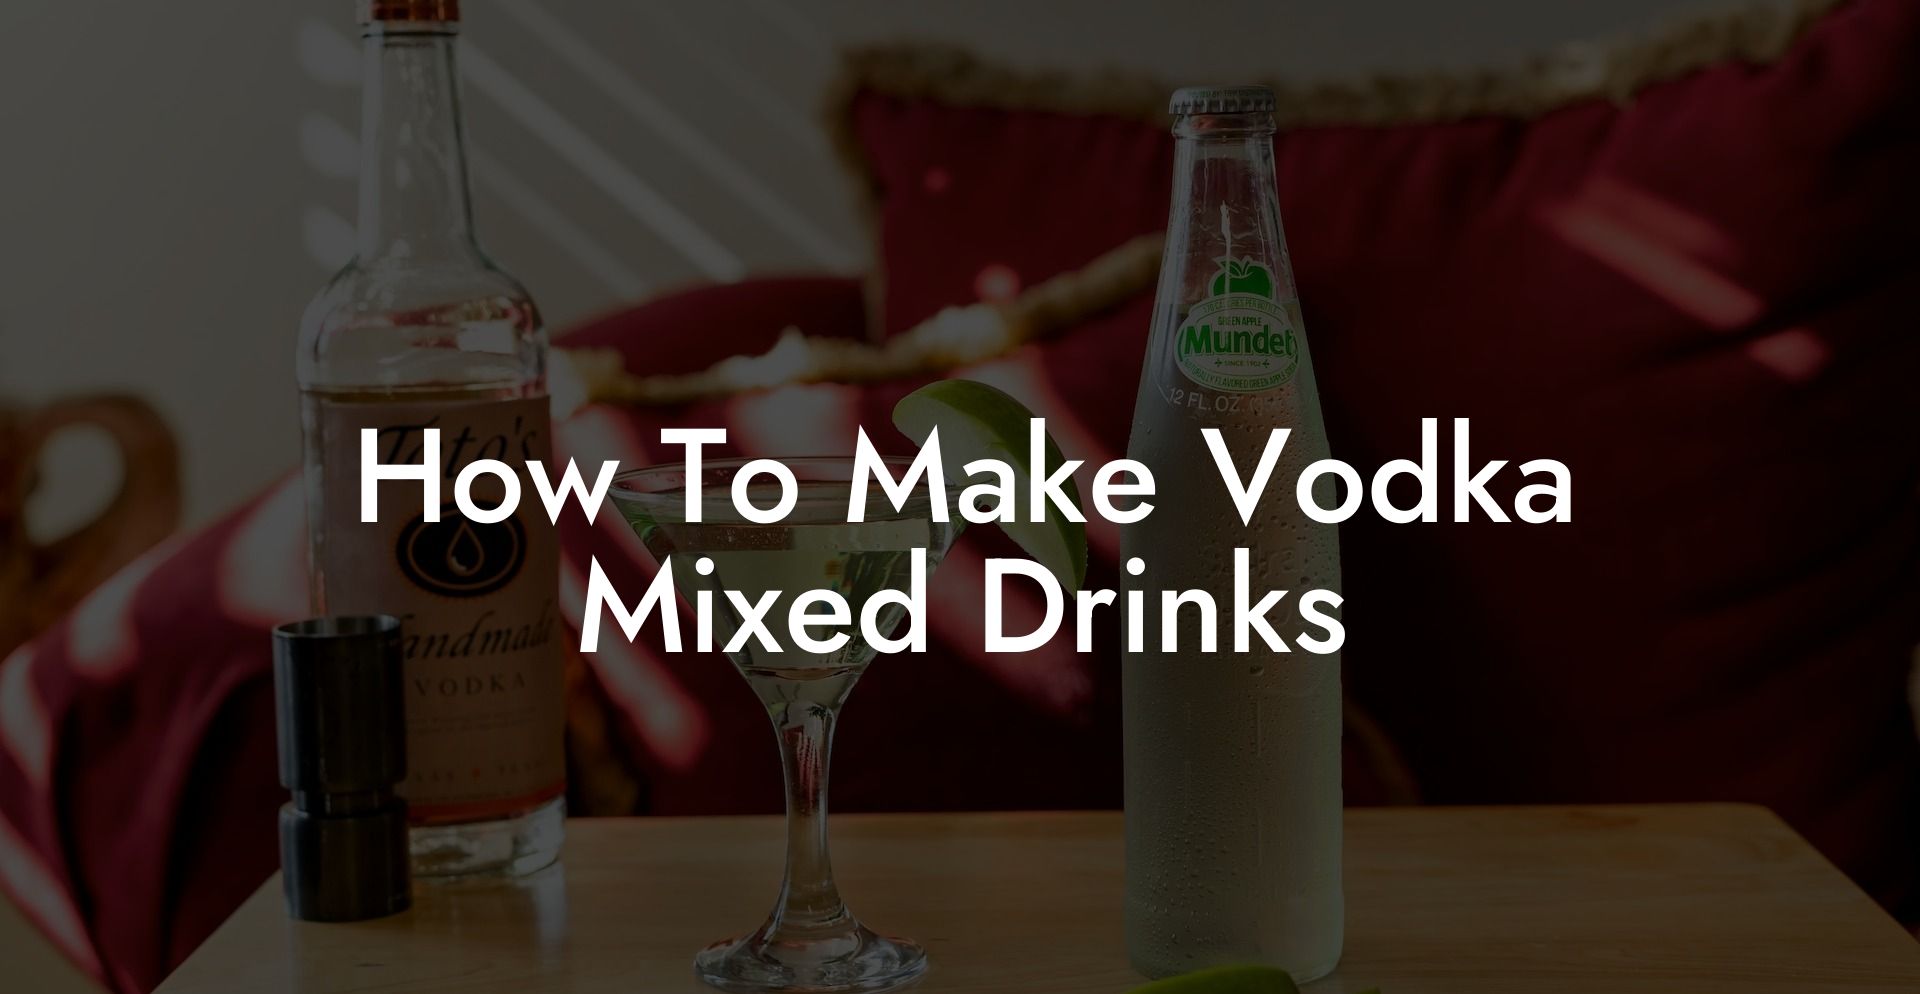 How To Make Vodka Mixed Drinks